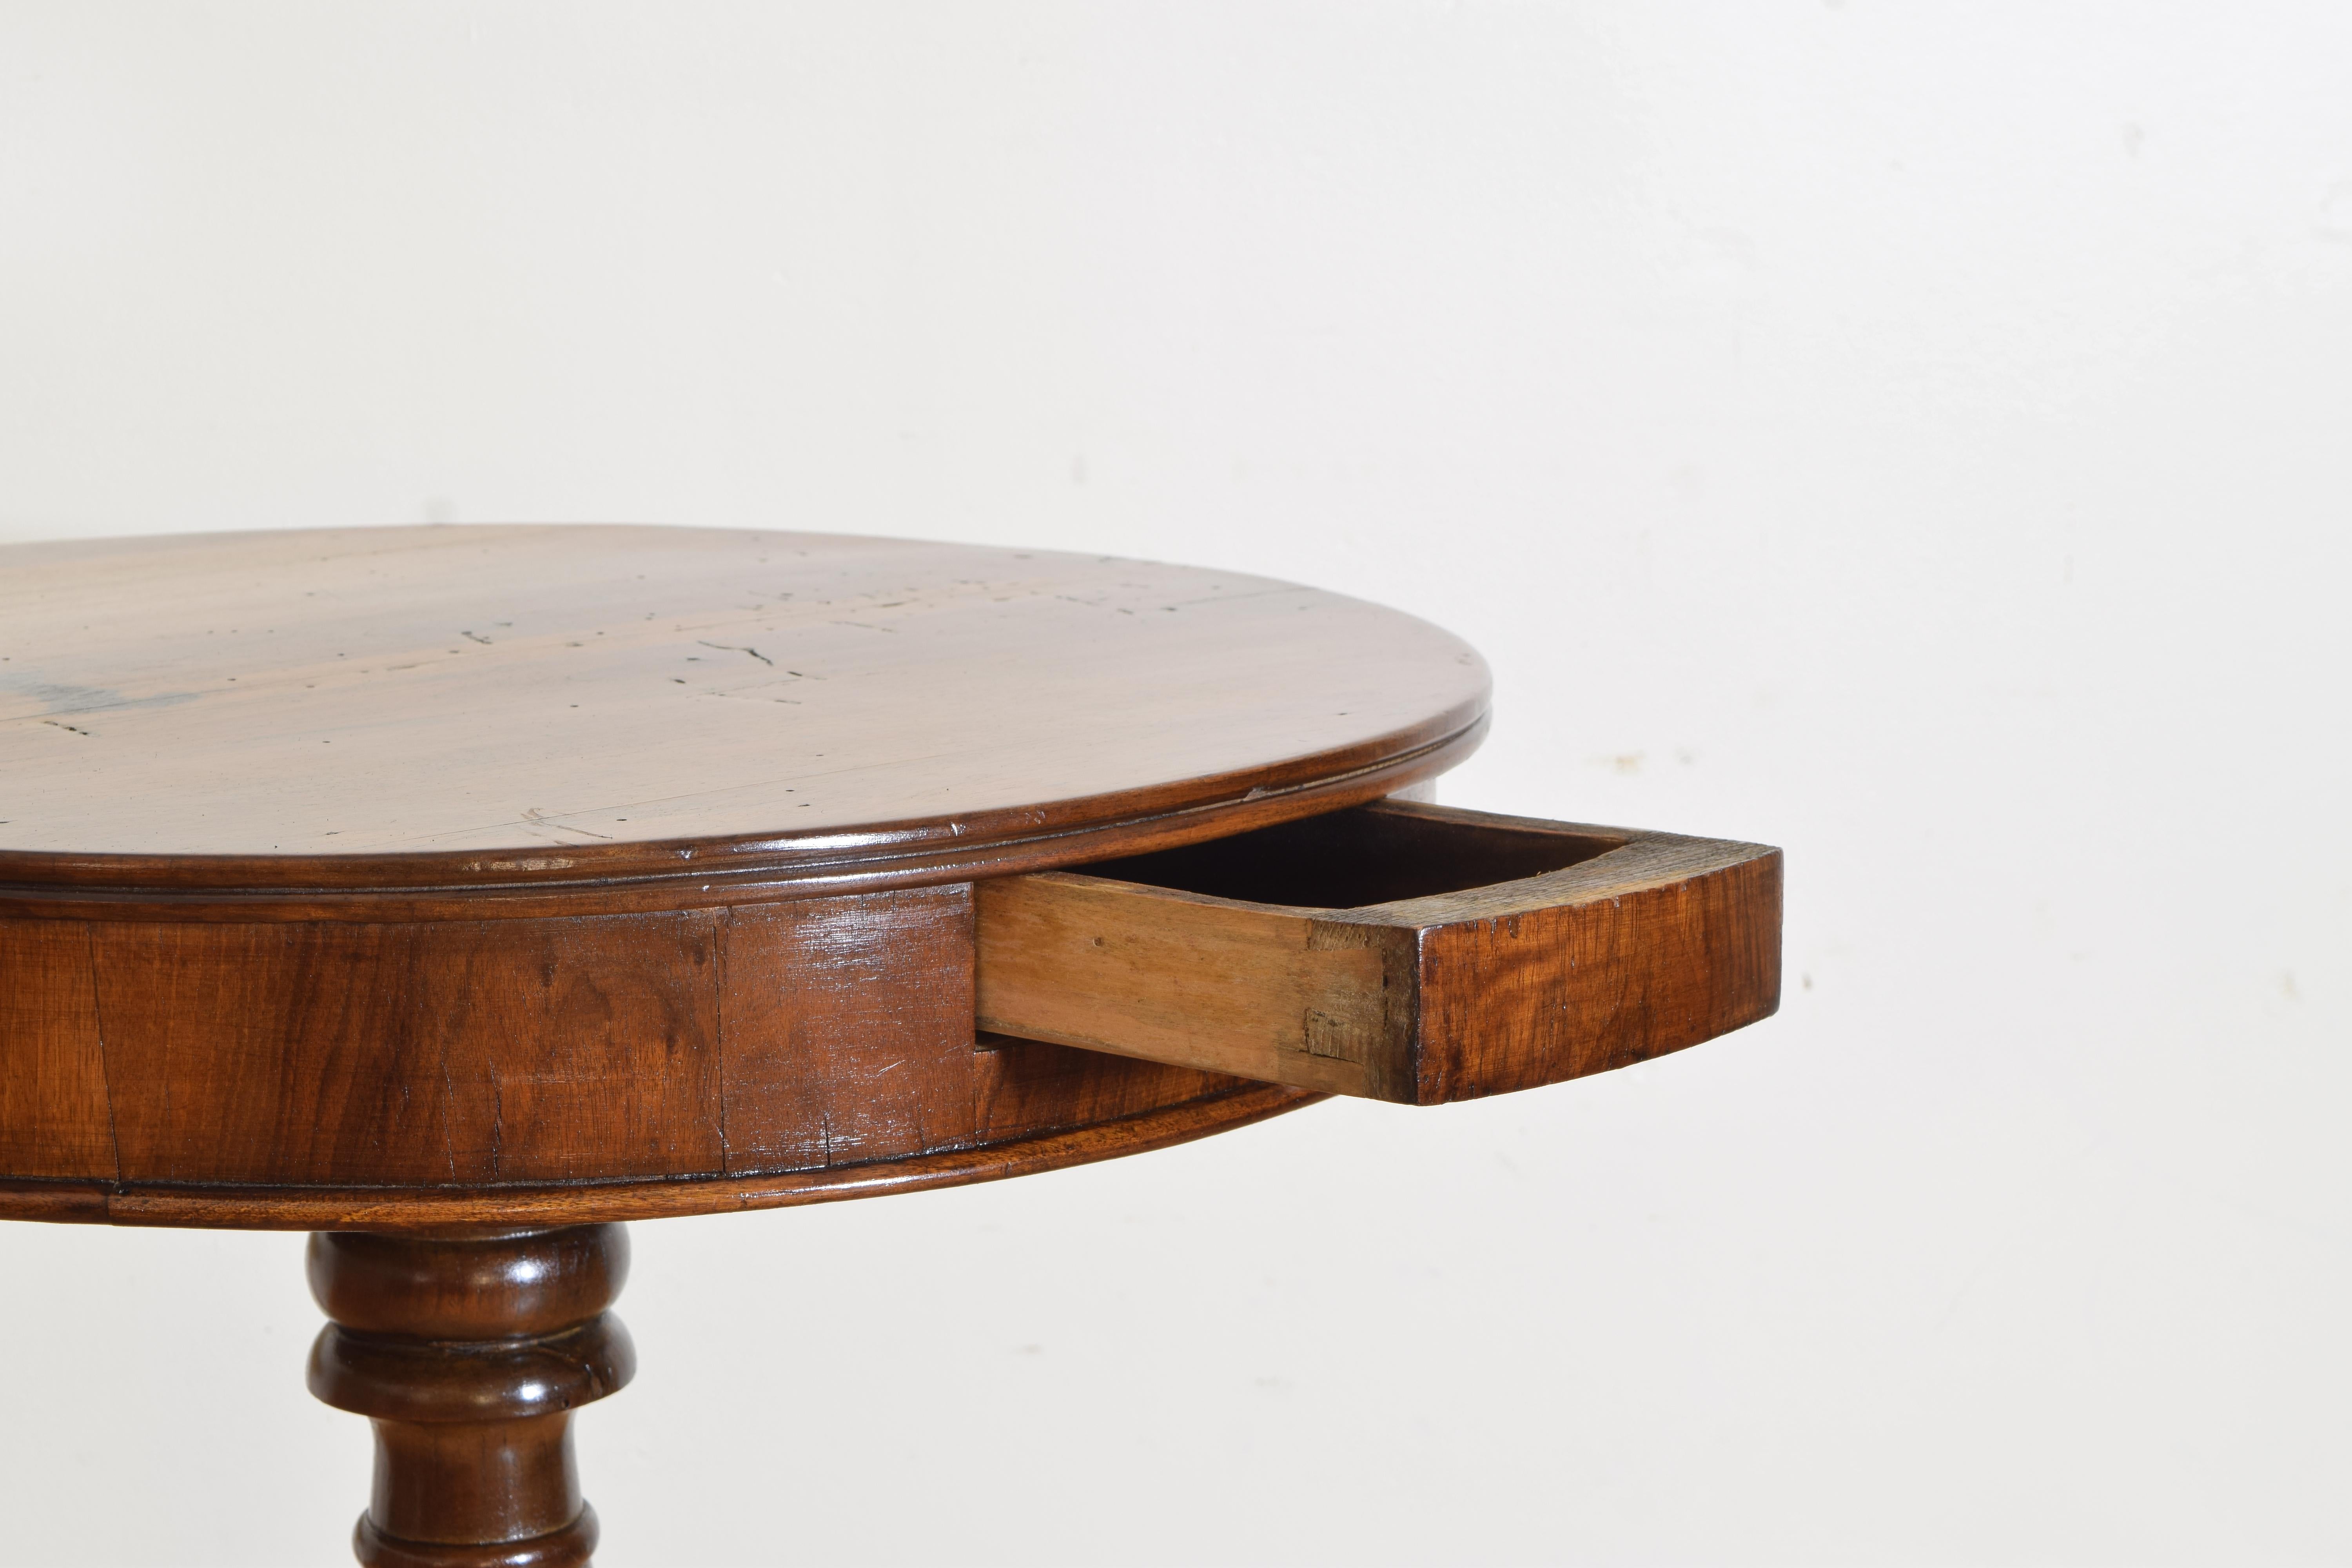 Hand-Carved Italian Carved Walnut One Drawer Pedestal Side Table, Mid 19th century For Sale